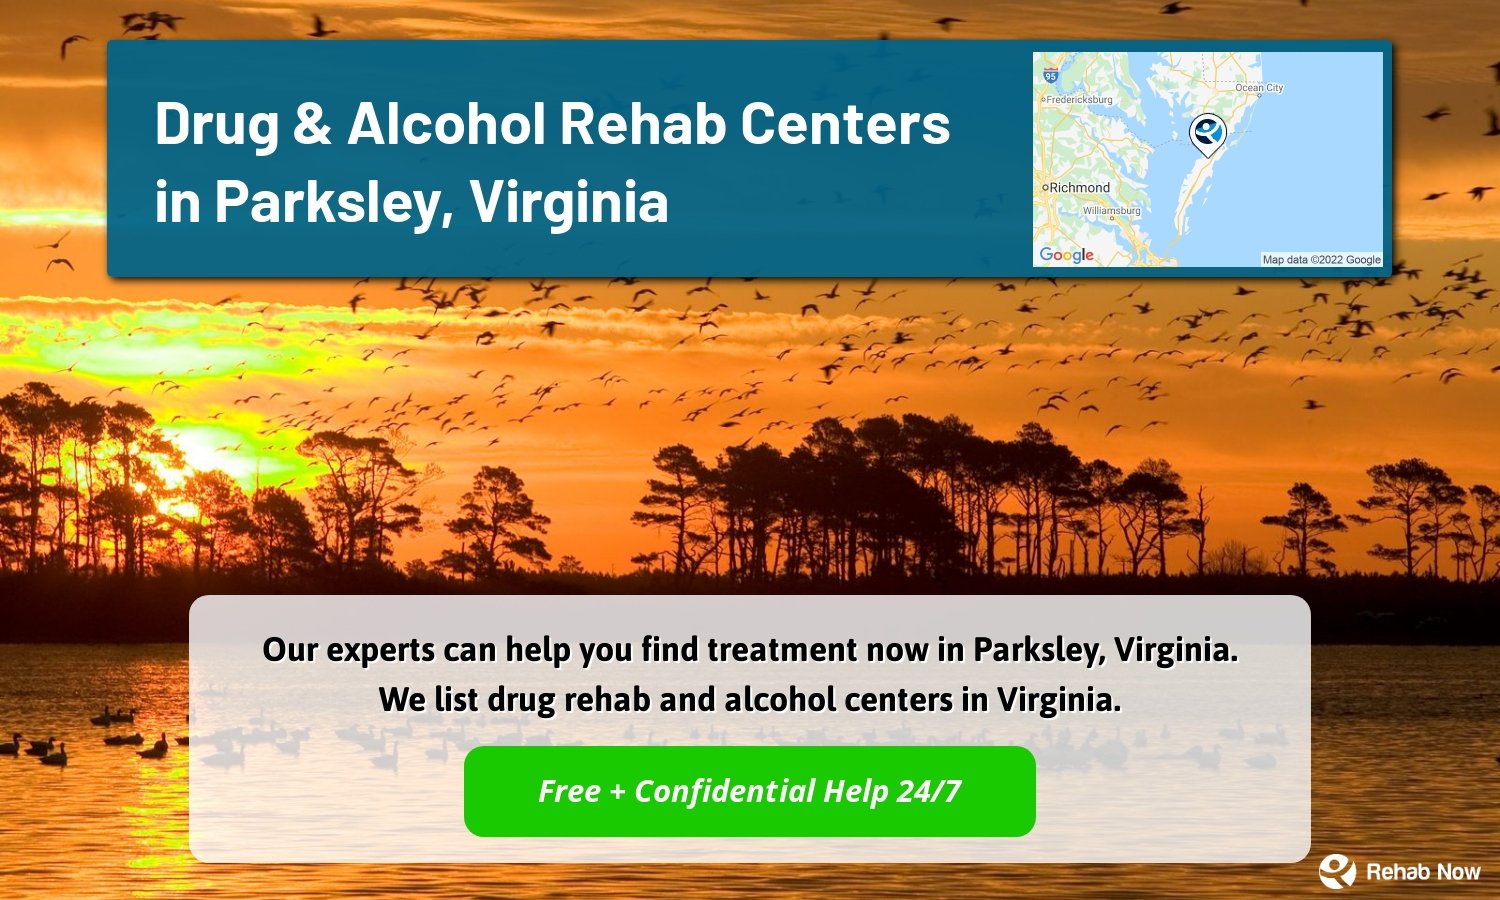 Our experts can help you find treatment now in Parksley, Virginia. We list drug rehab and alcohol centers in Virginia.